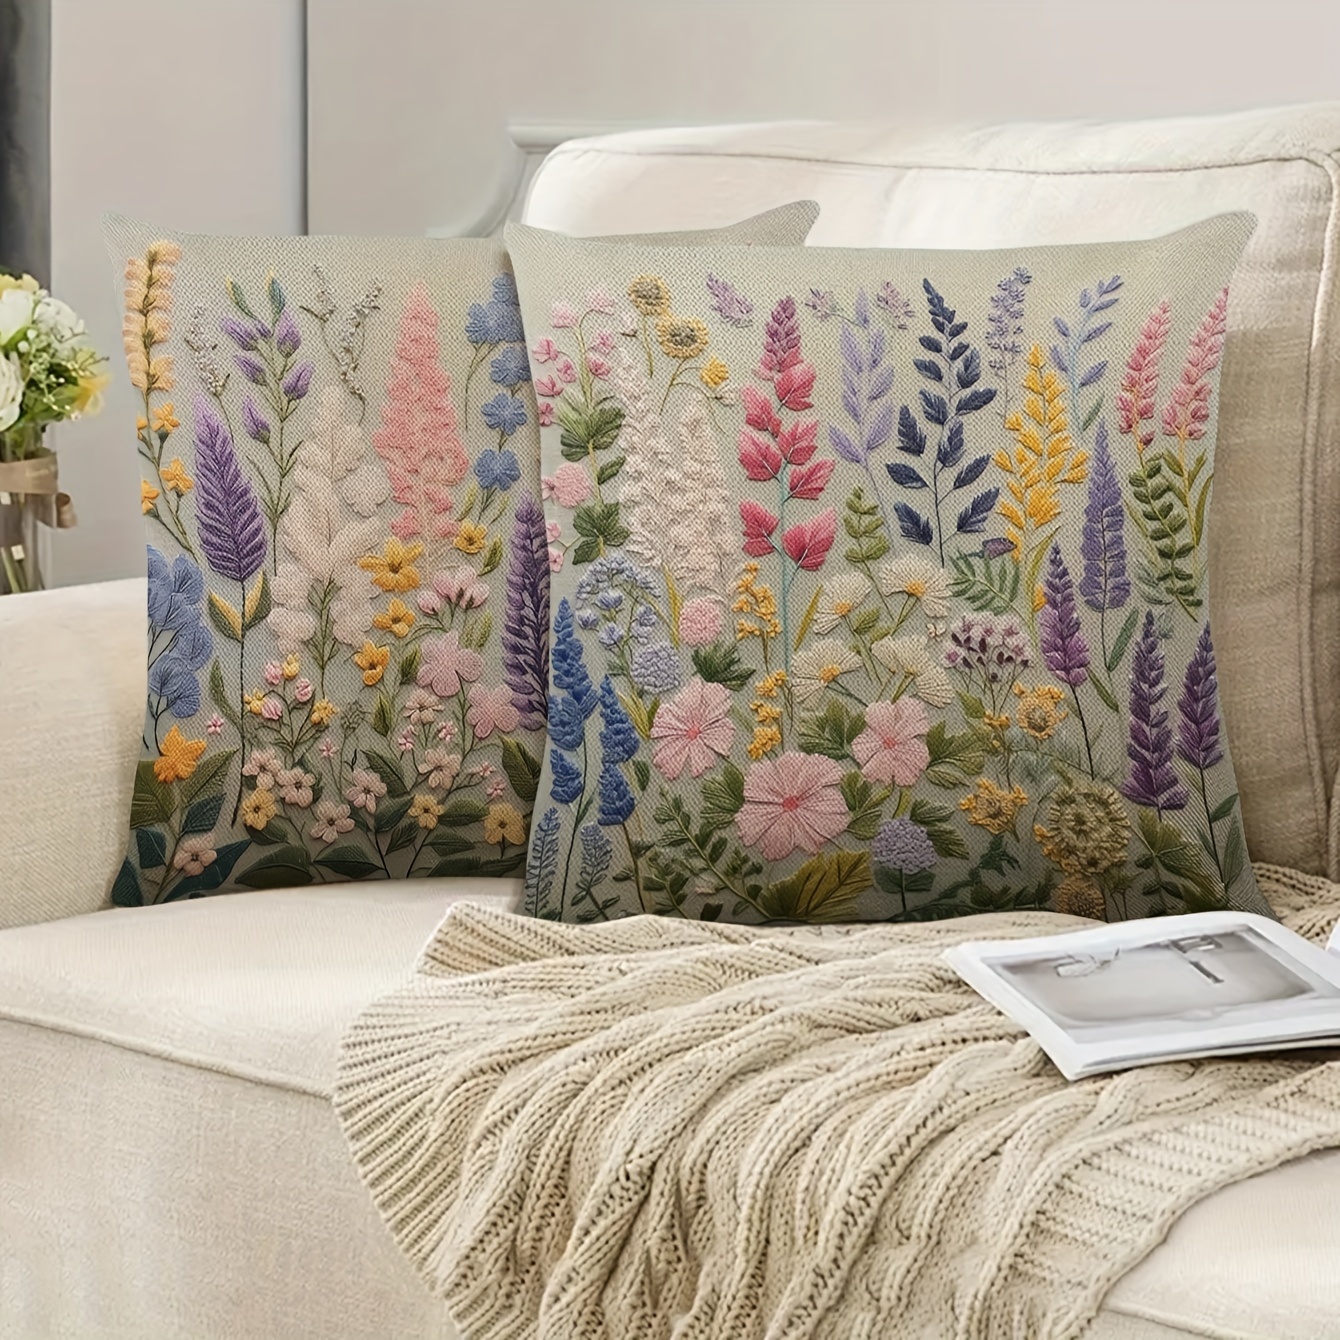 

2pc, Flowers Pattern Printed Pillowcases - Suitable For Sofa Beds, Car Living Rooms, And Home Decoration. Square Linen Material, 18"x18", Zip Closure, Machine Washable, And Knit Fabric.